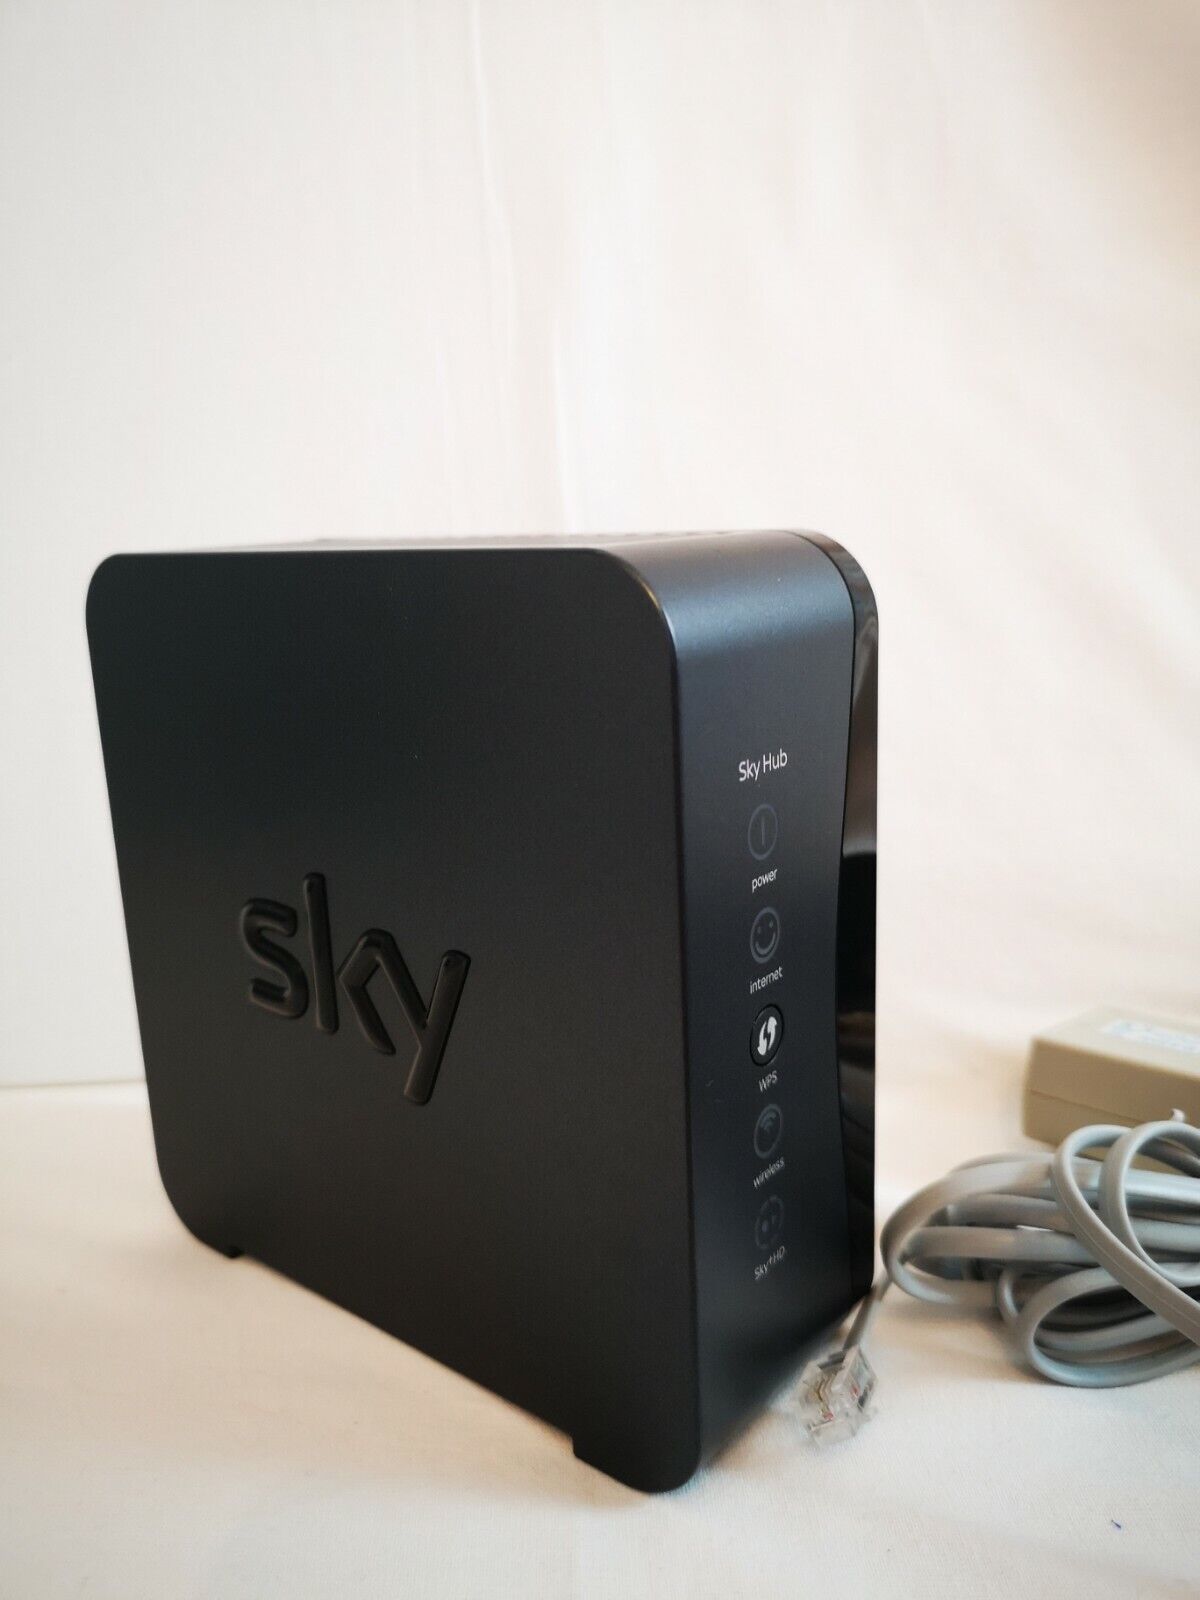 Get injured Get angry defeat SKY HUB SR-102 WIRELESS LATEST INTERNET BLACK ROUTER | eBay